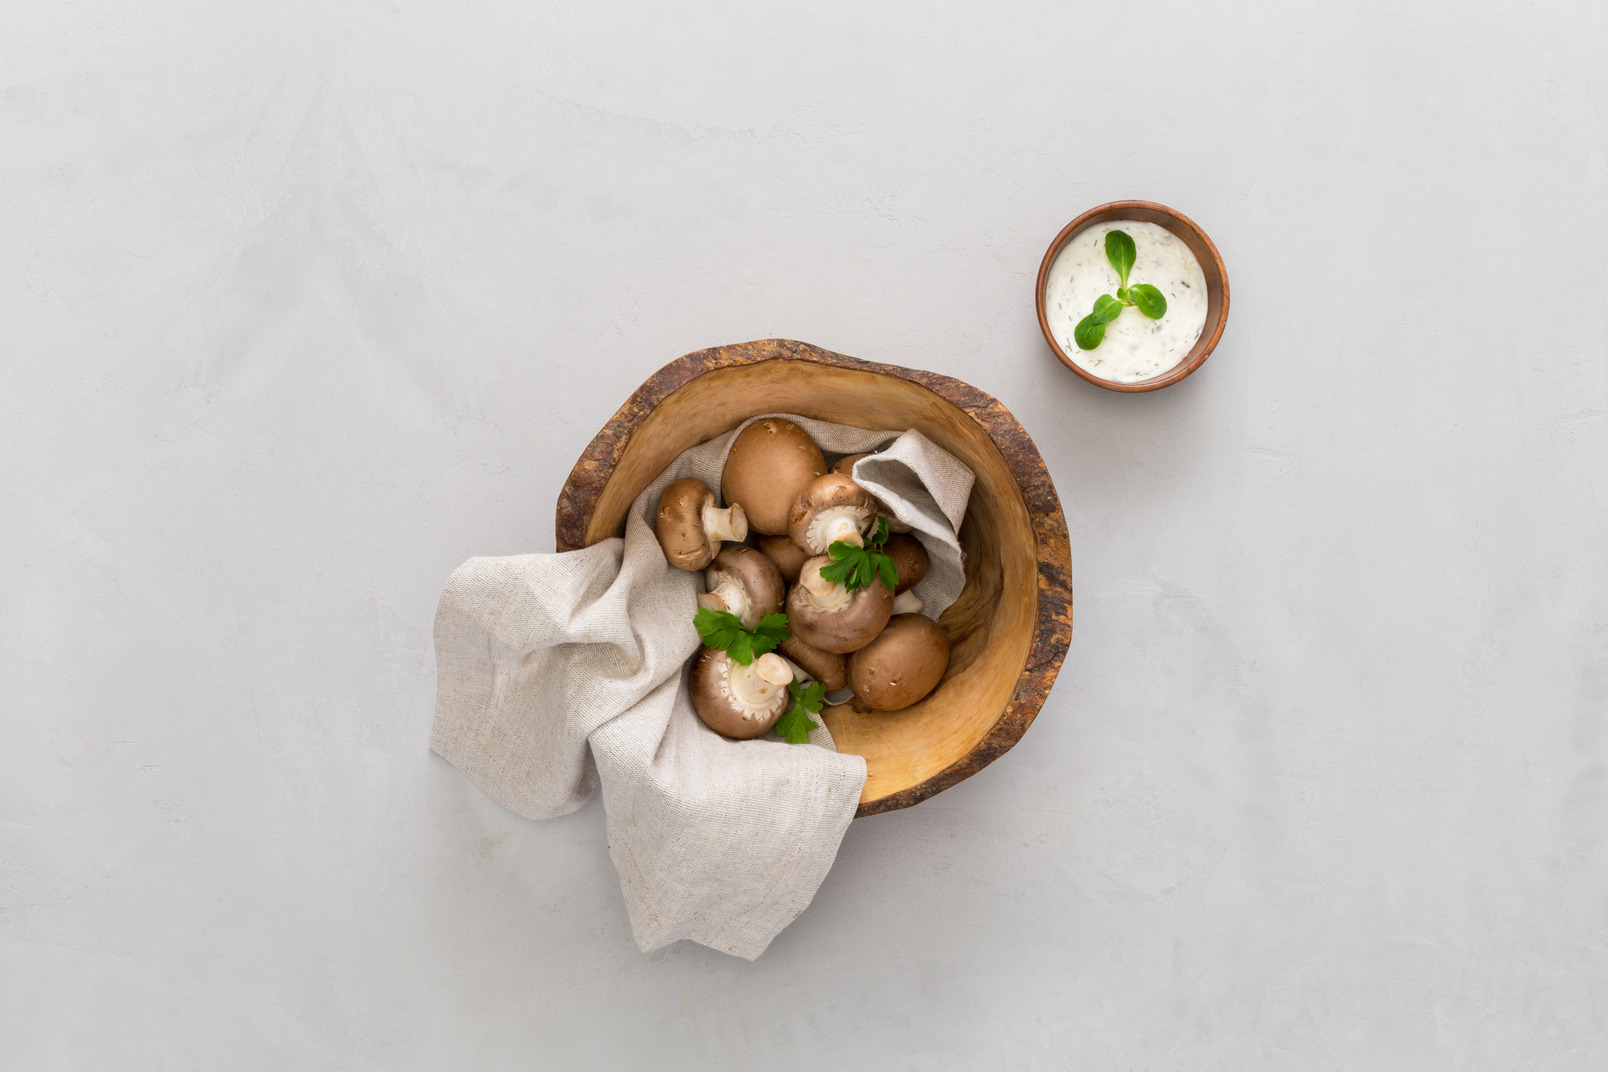 Mushrooms in wooden bowl and spices